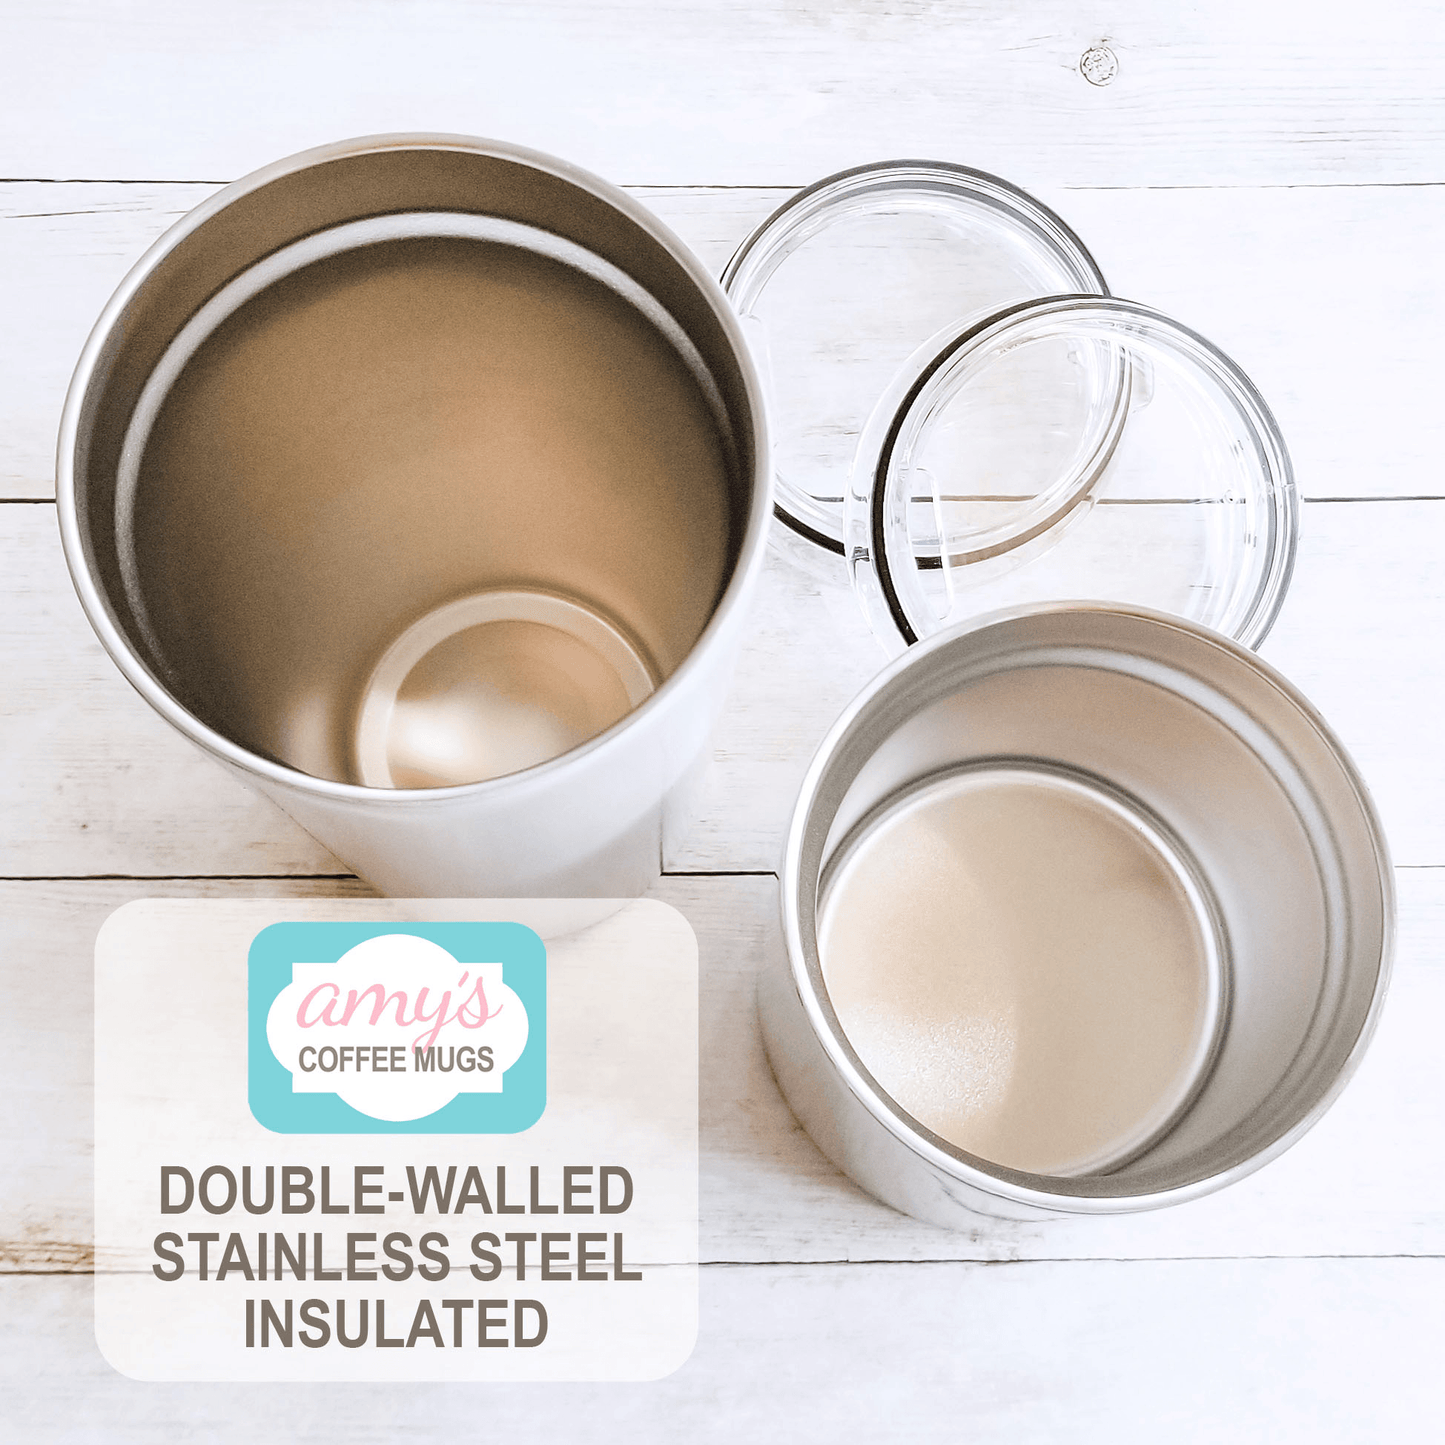 Double-walled stainless steel inside of tumbler cups at Amy's Coffee Mugs